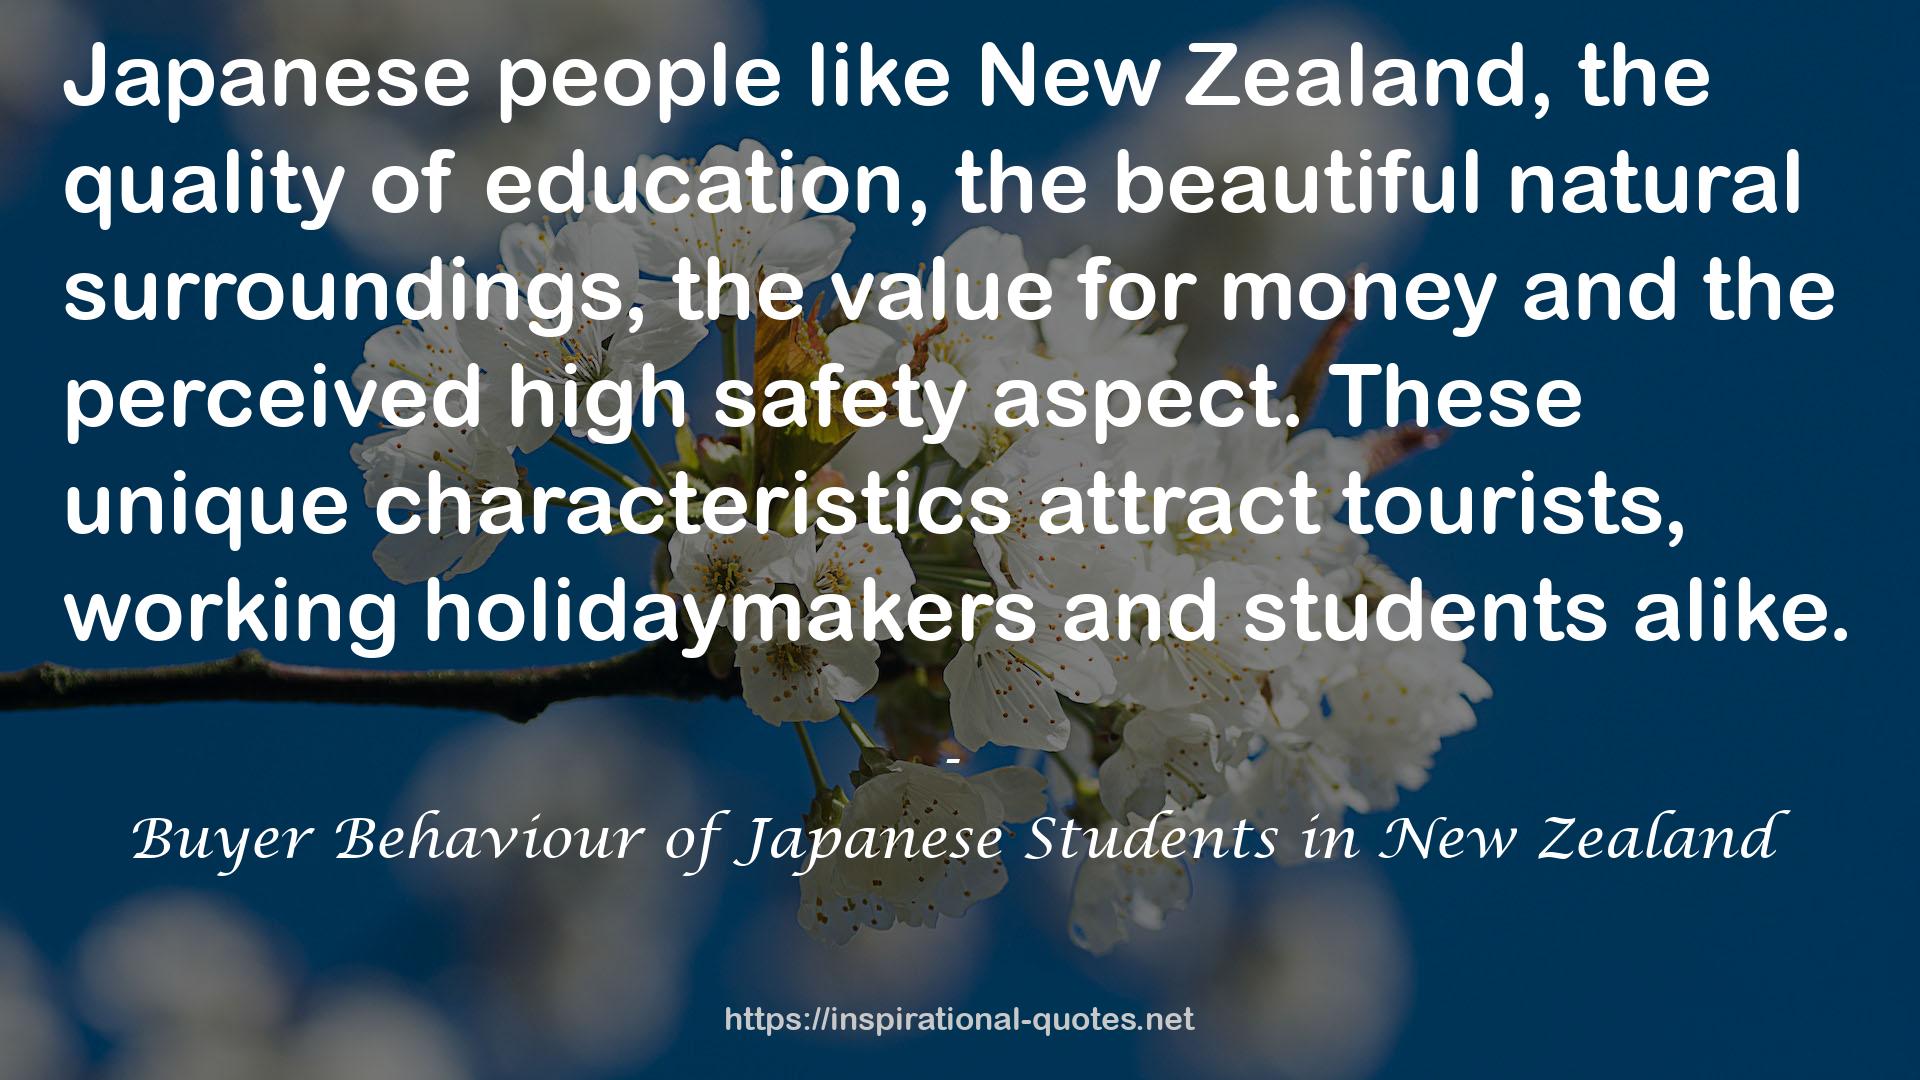 Buyer Behaviour of Japanese Students in New Zealand QUOTES